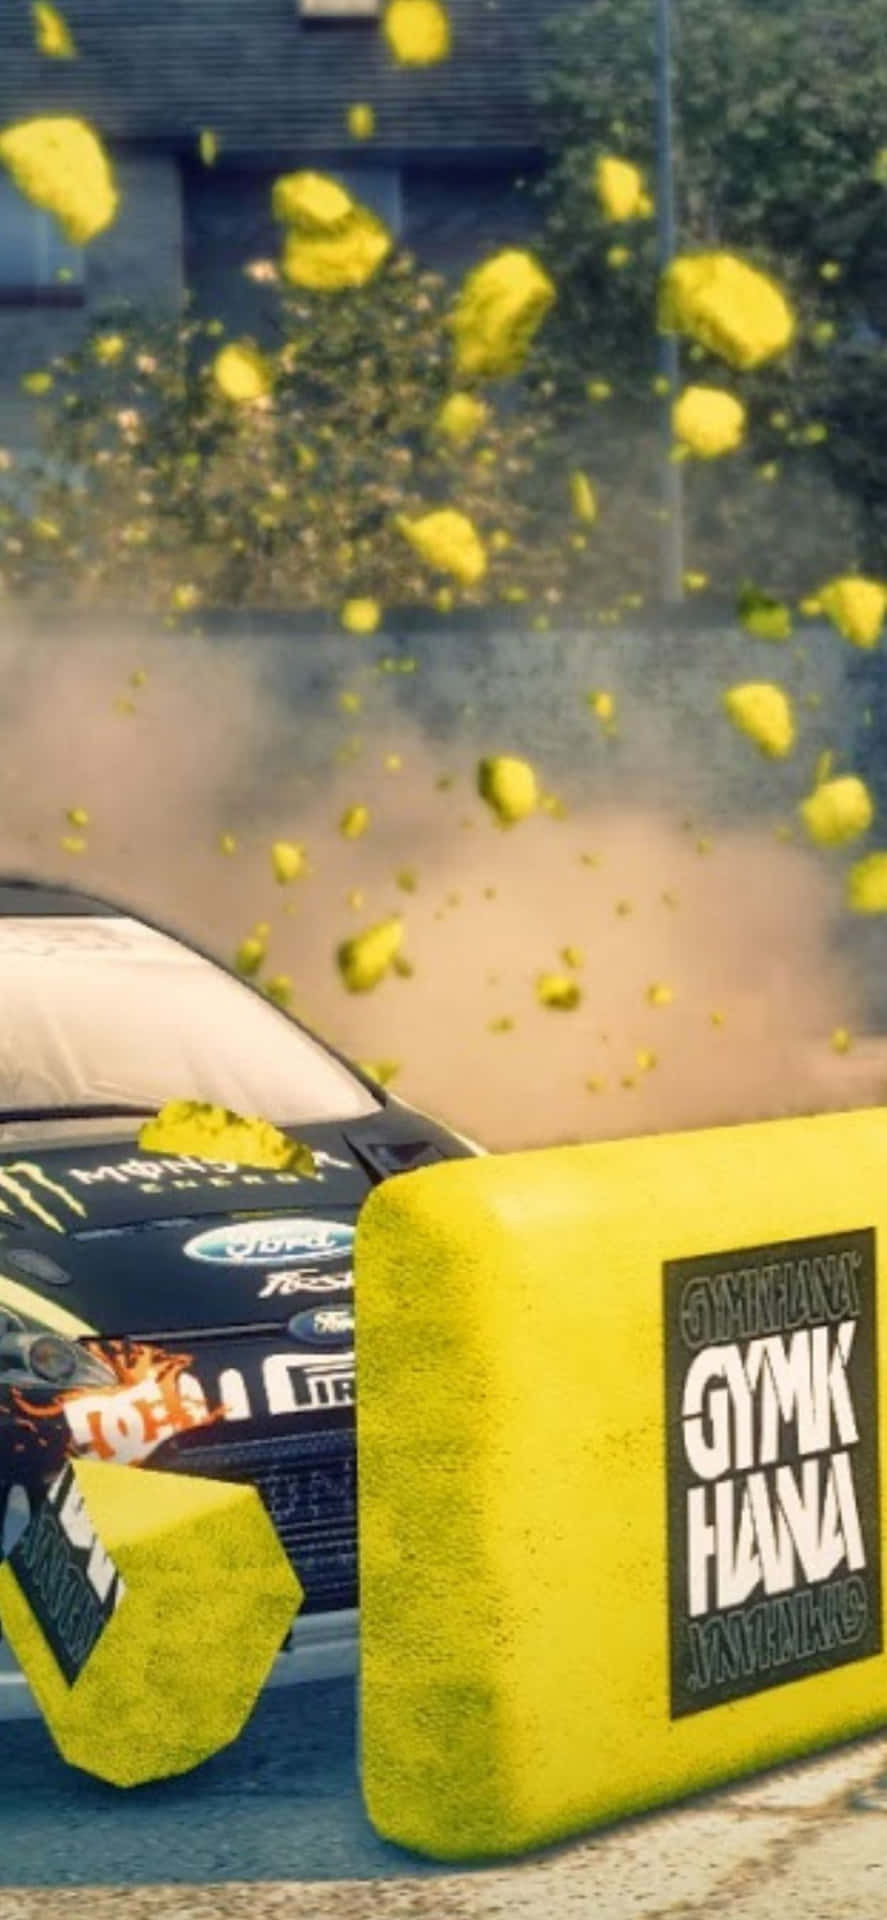 Experience the thrill of racing with an Iphone Xs Max and Dirt 3